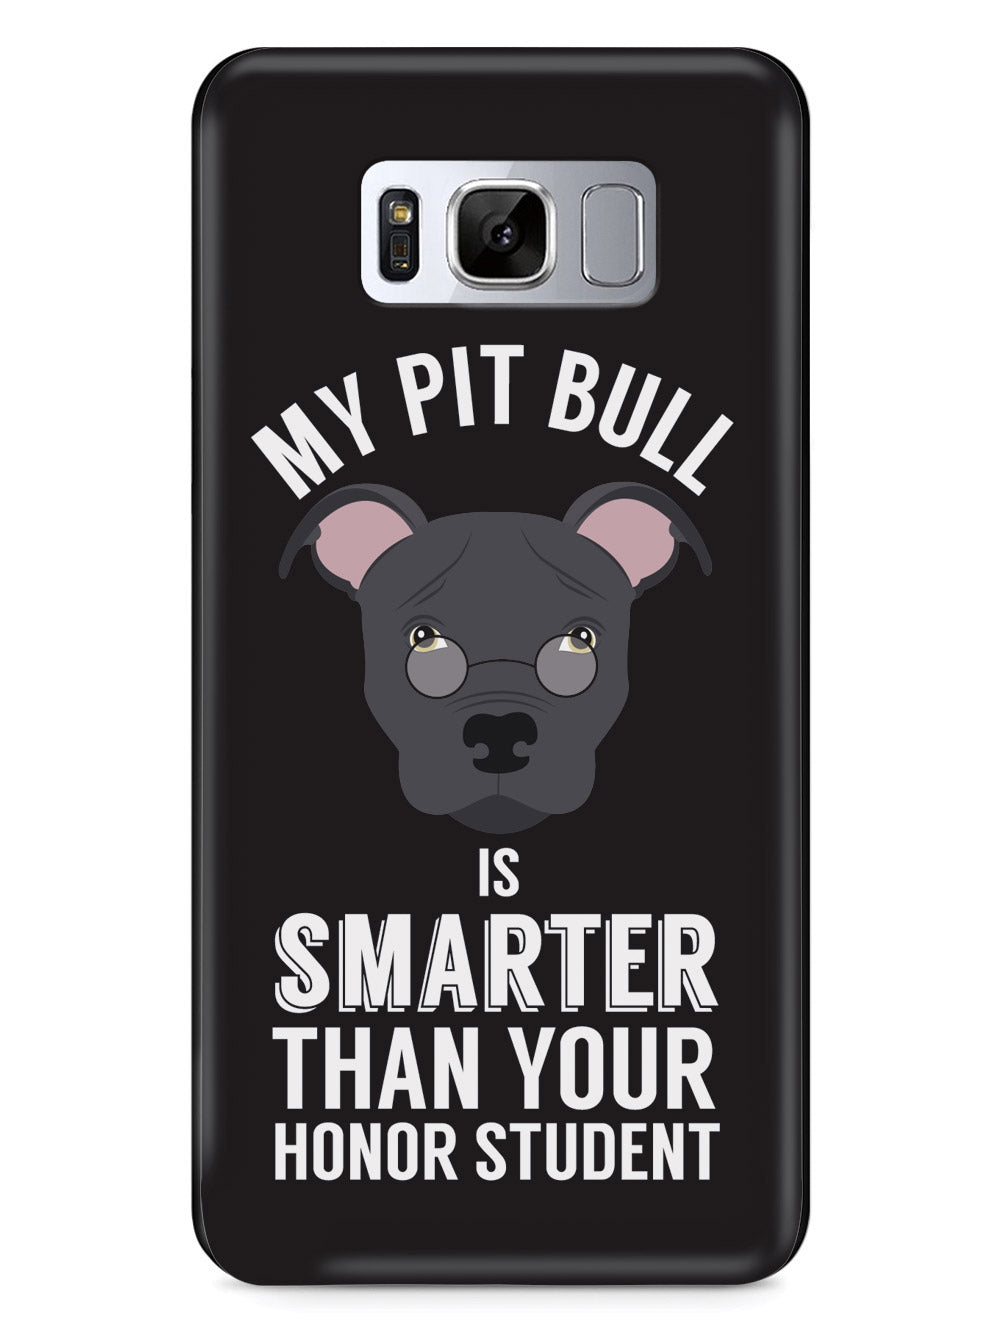 Smarter Than Your Honor Student - Pitbull Case